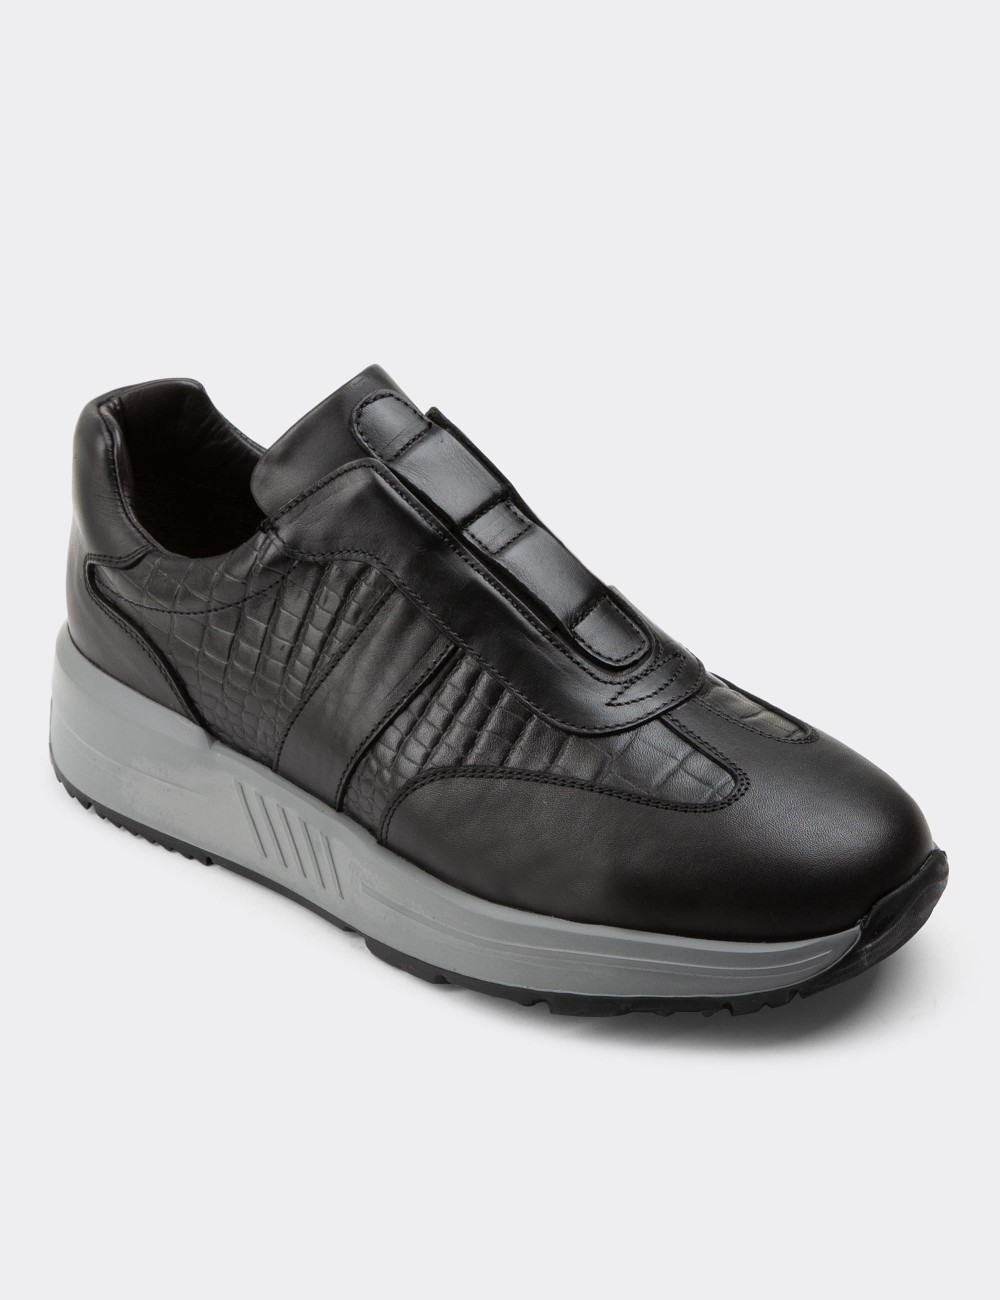 Black Leather Sneakers - 01891MSYHE01